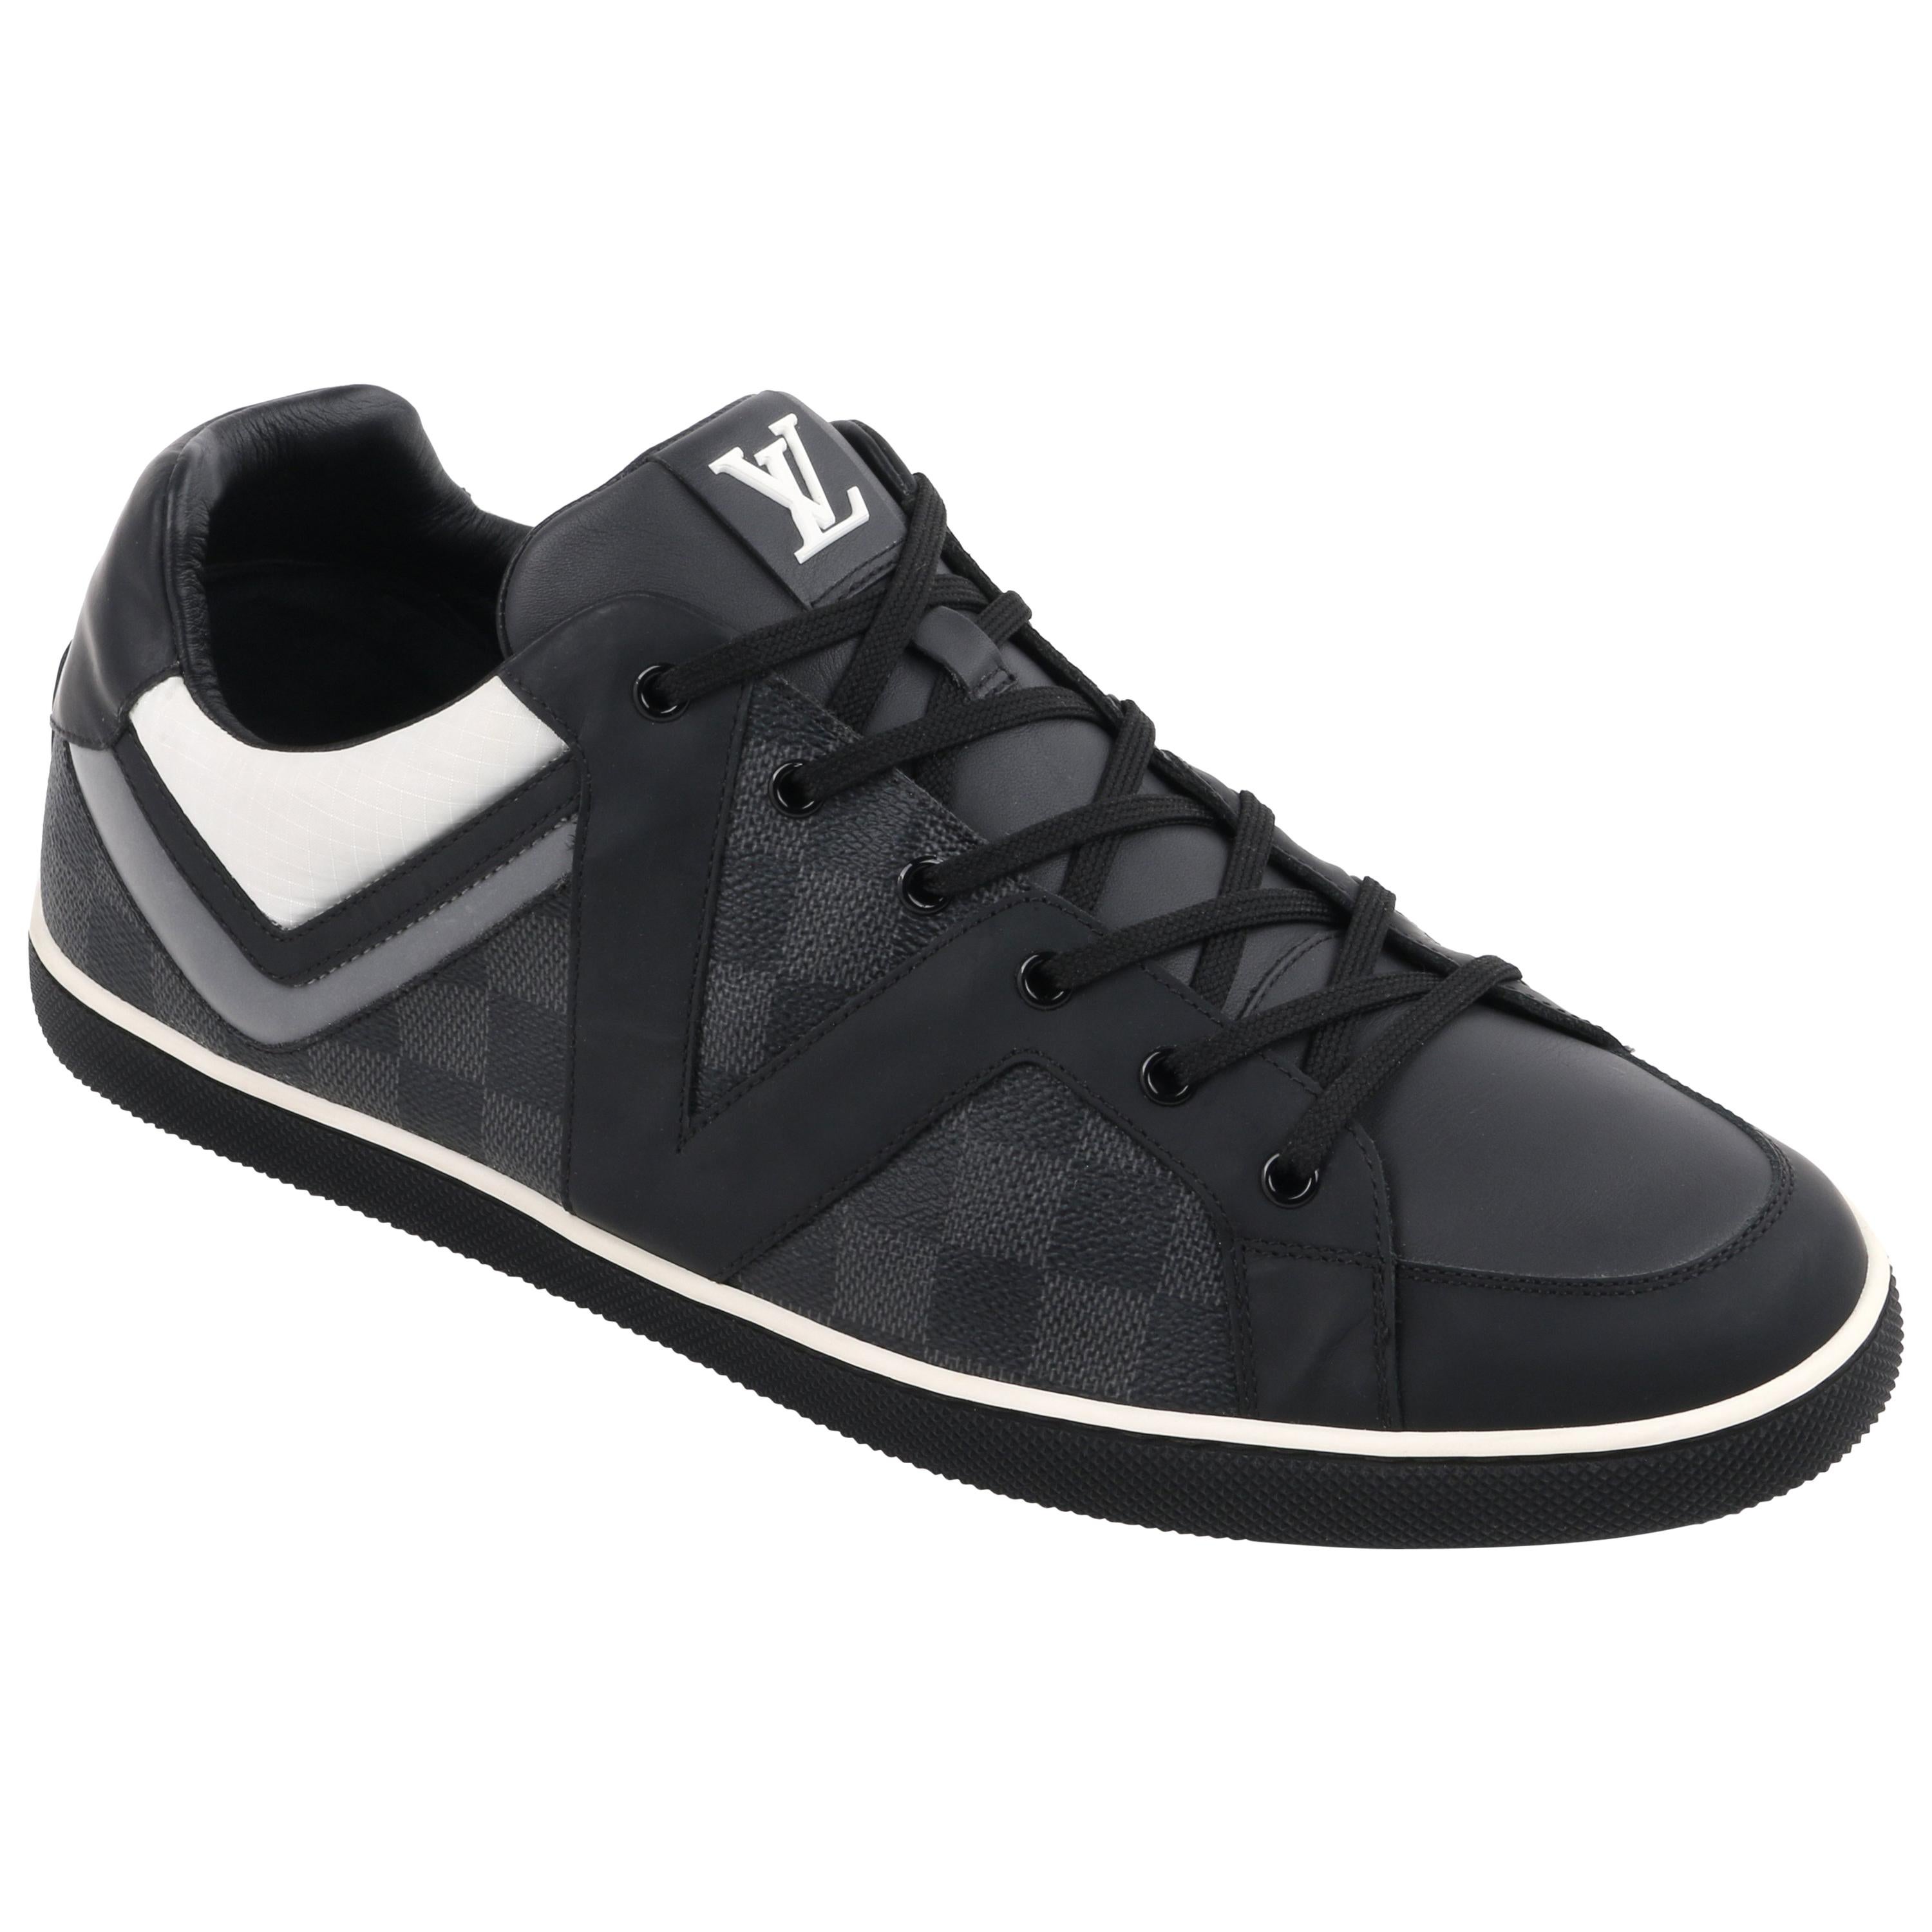 LOUIS VUITTON A/W 2012 "Heroes" Graphite Damier Canvas & Leather Low Top Sneaker